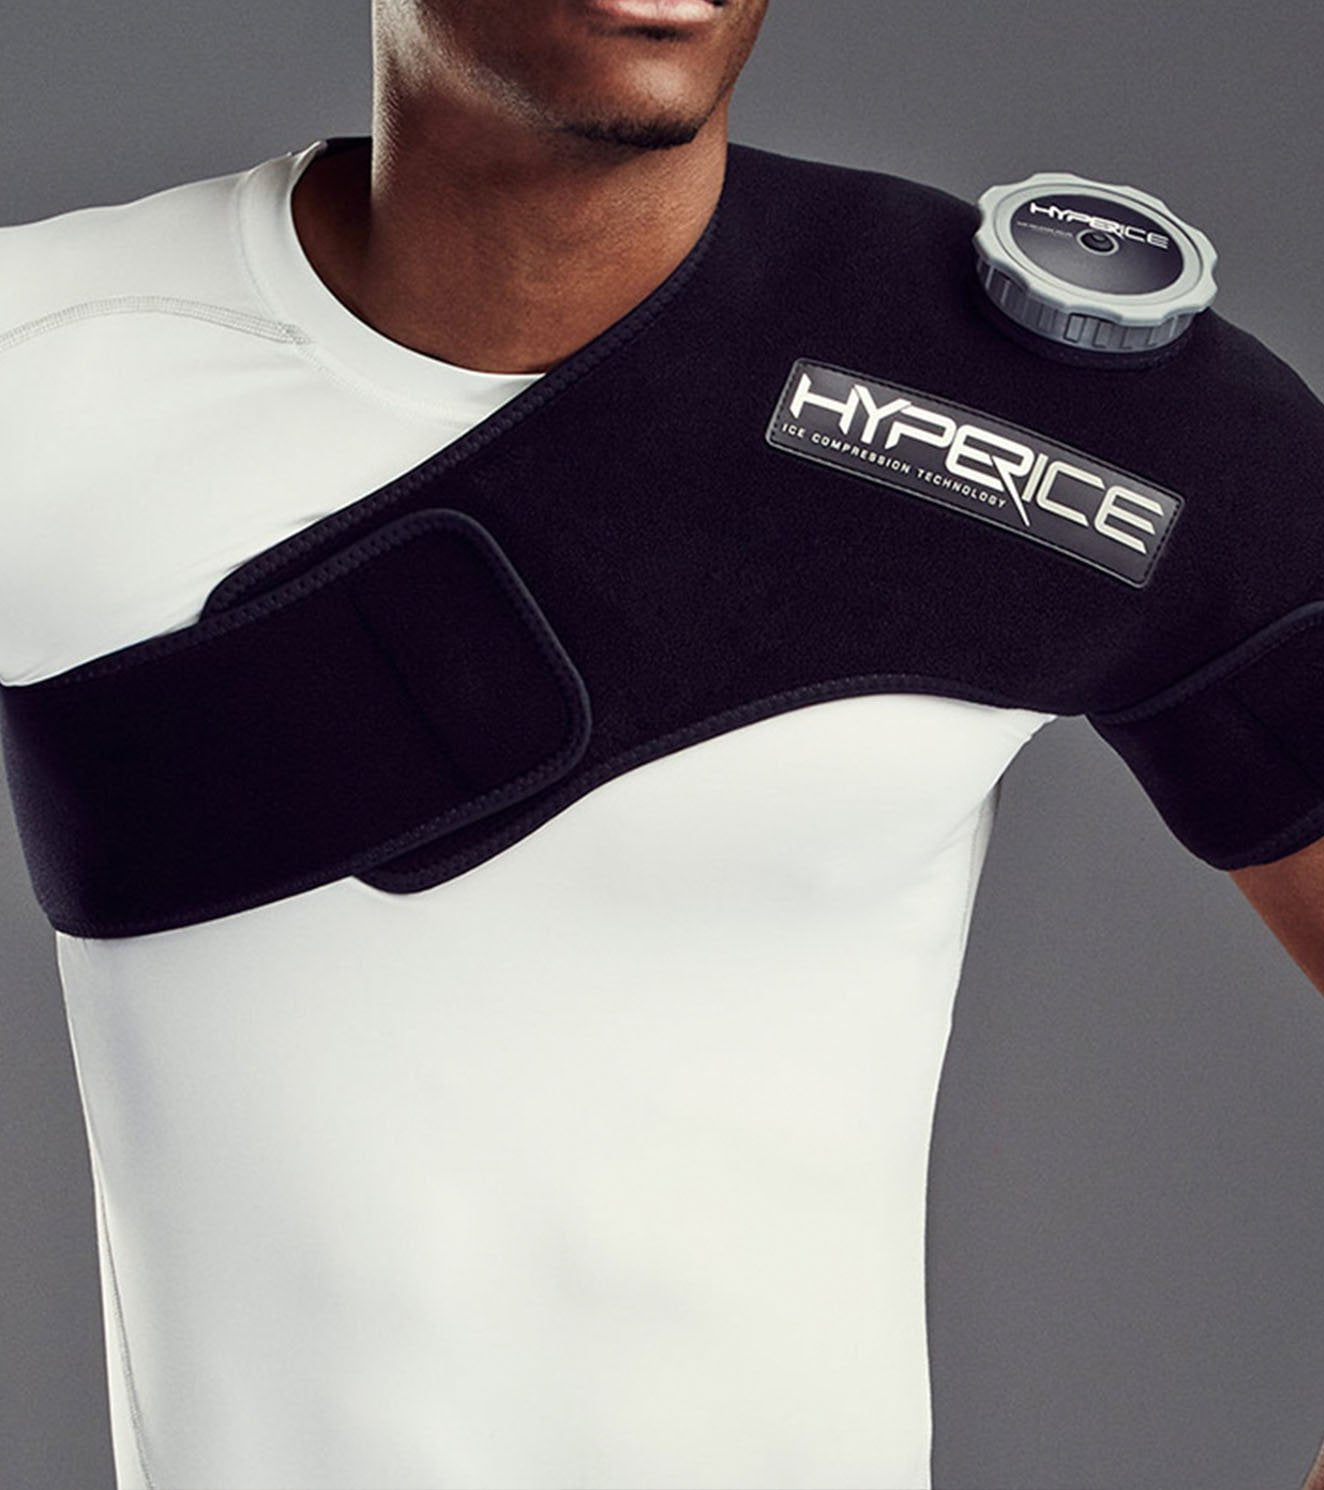 Hyperice ICT Pro Shoulder Ice & Compression Wrap - Buy now online with Free delivery in 1-2 days in UAE, Dubai, Abu-Dhabi.